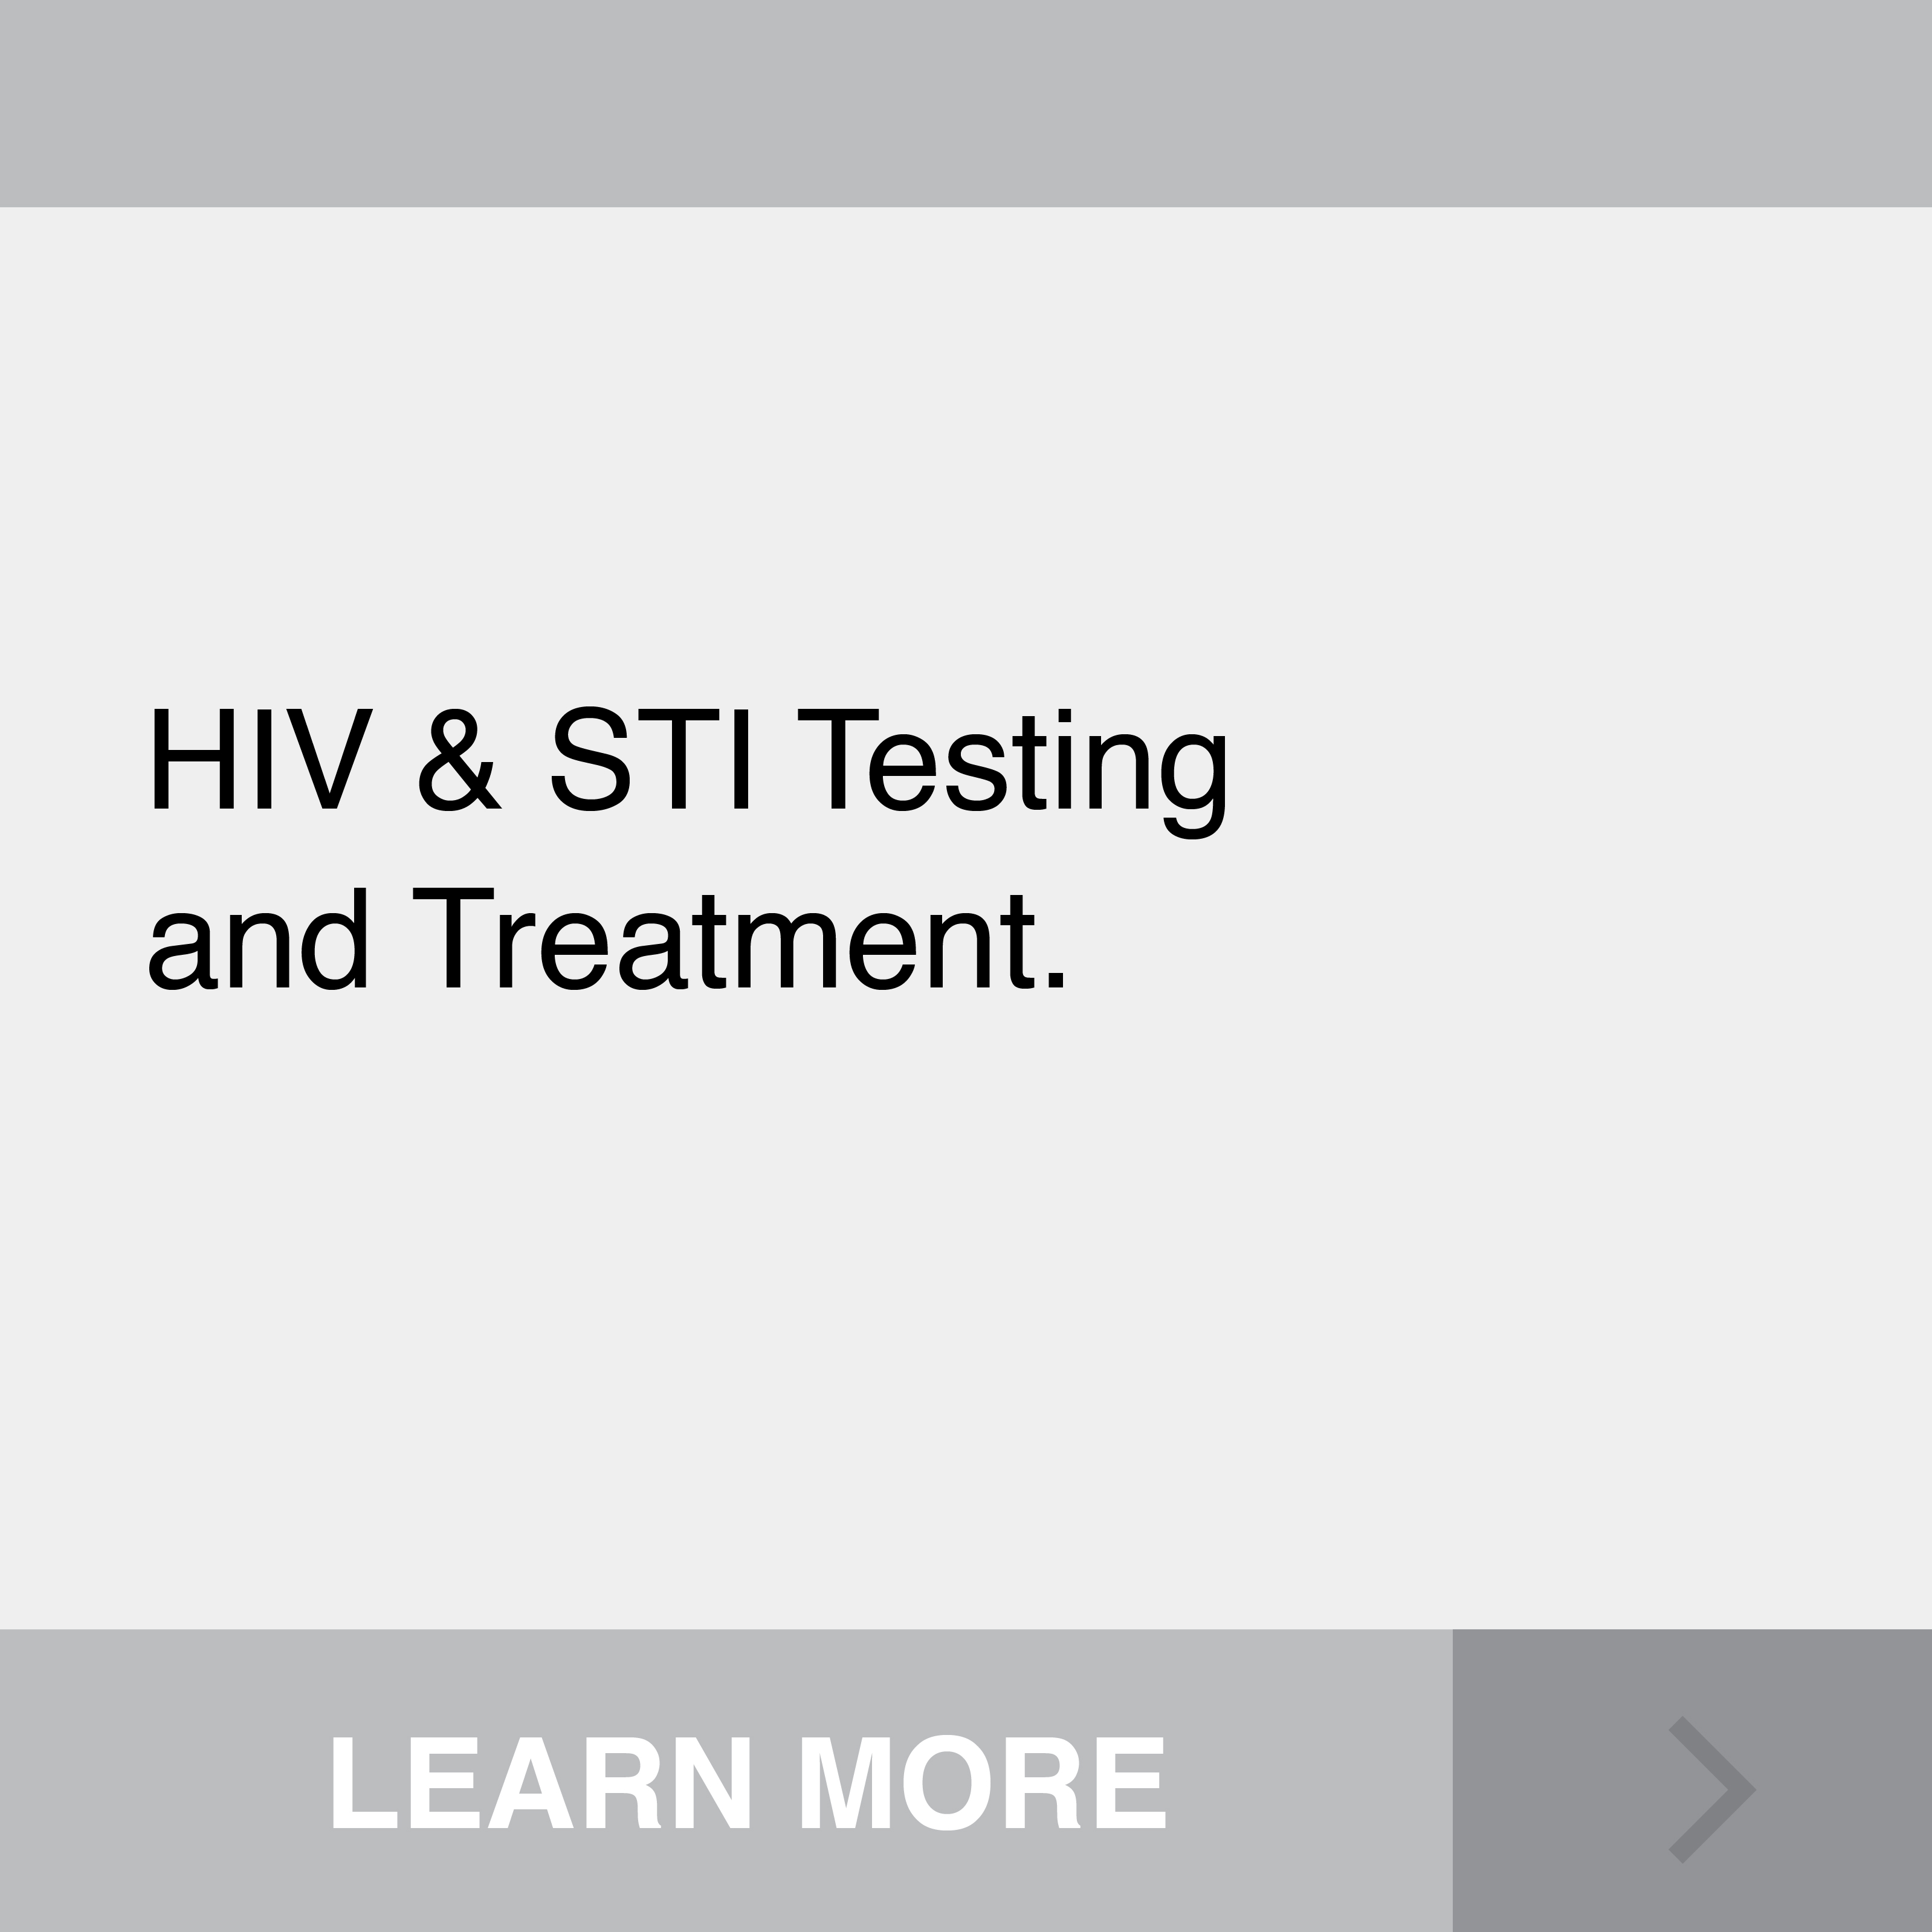 HIV & STI Testing and Treatment. Click to Learn More.